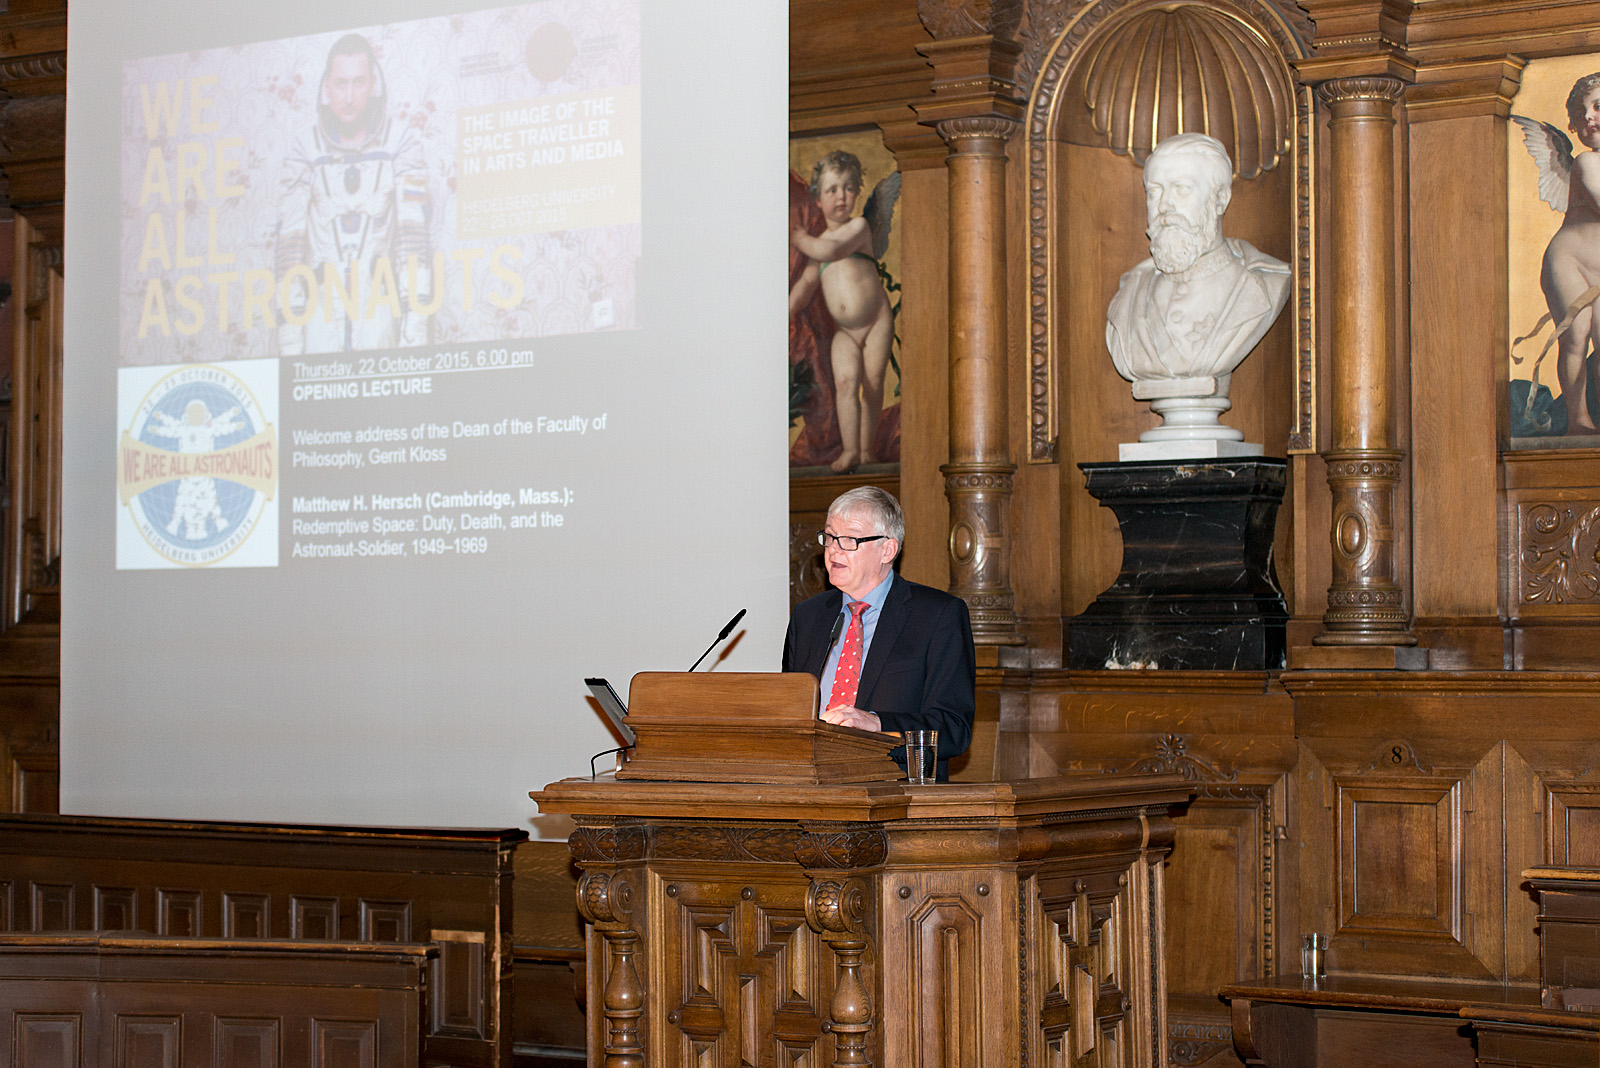 22 October, 2015 | OPENING LECTURE: Welcome address of the Dean of the Faculty of Philosophy, Gerrit Kloss